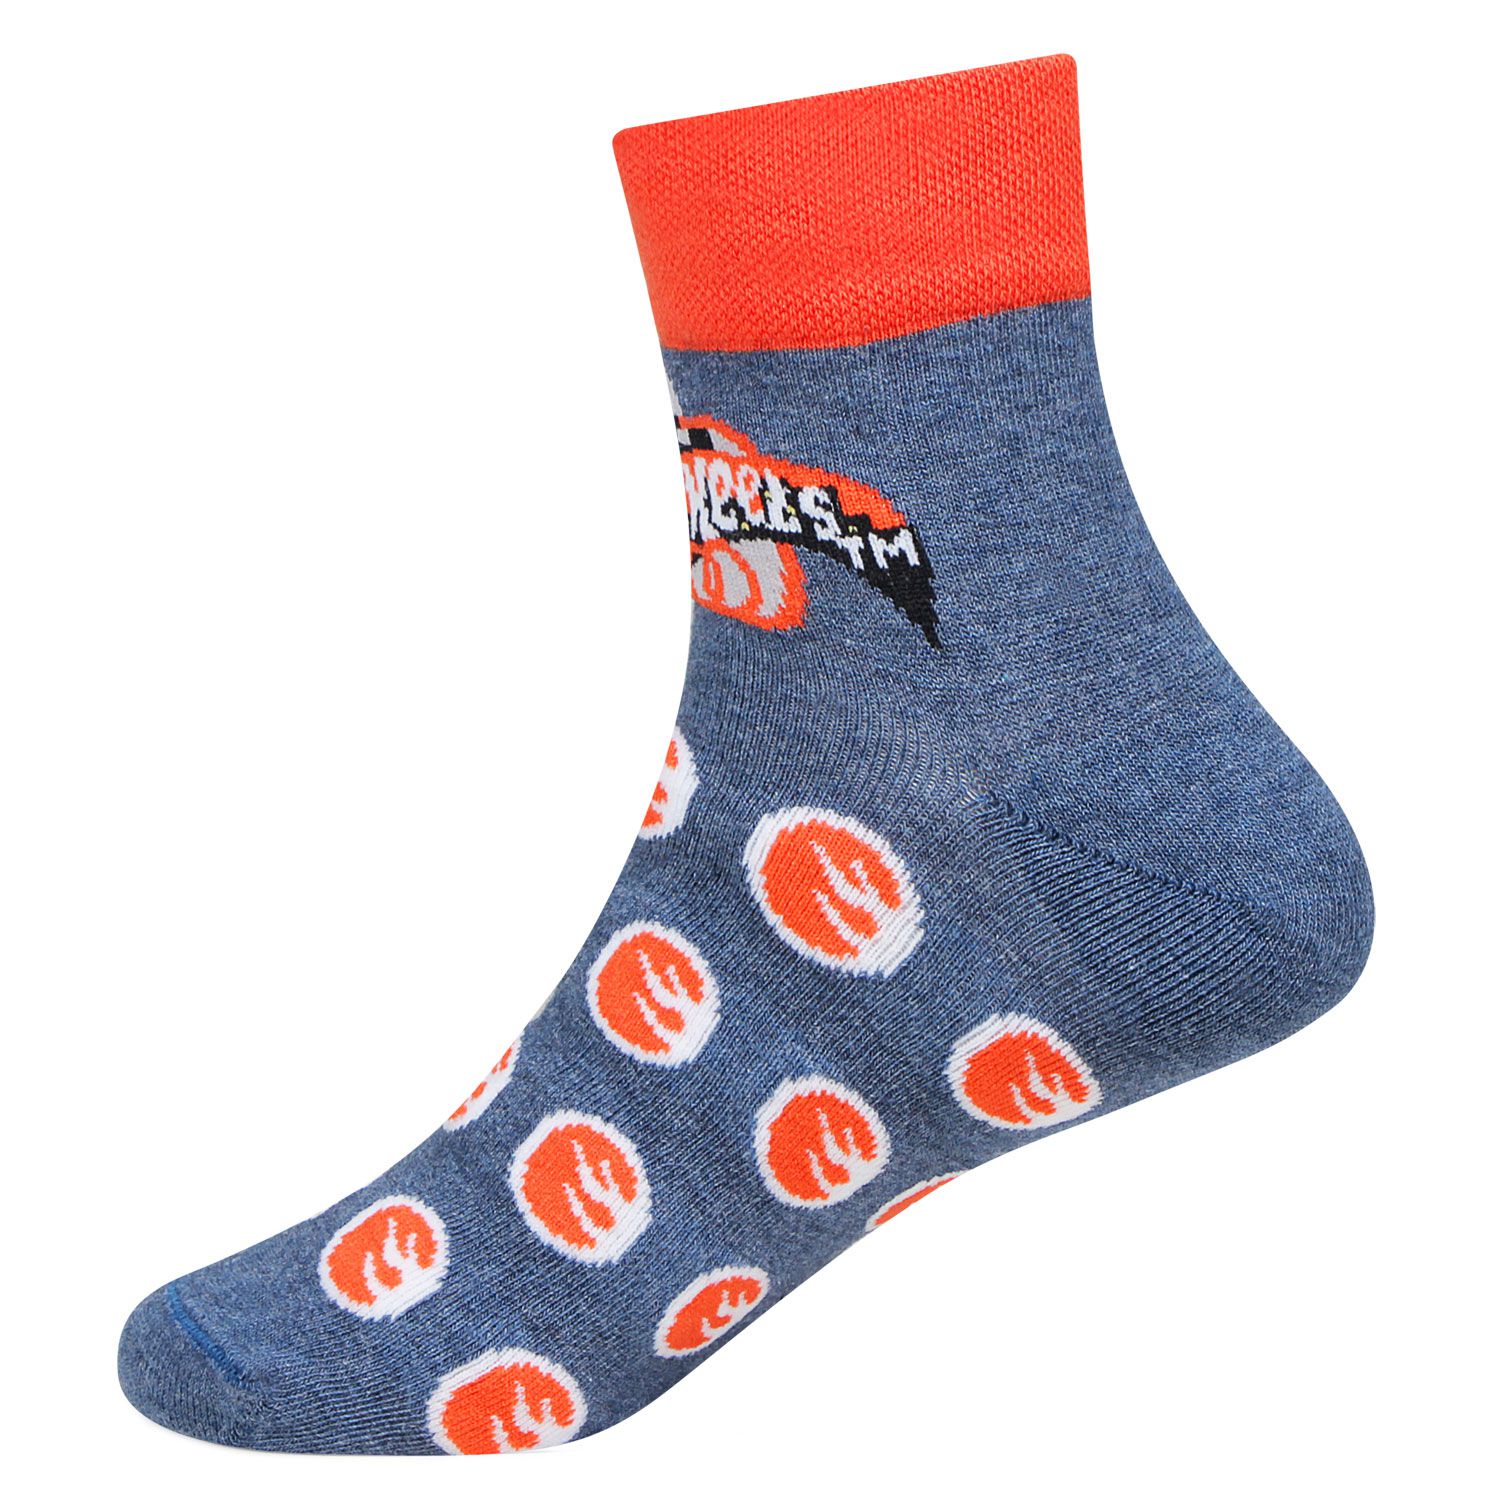 Hot Wheels Anklet Socks: Buy Online at Low Price in India - Snapdeal